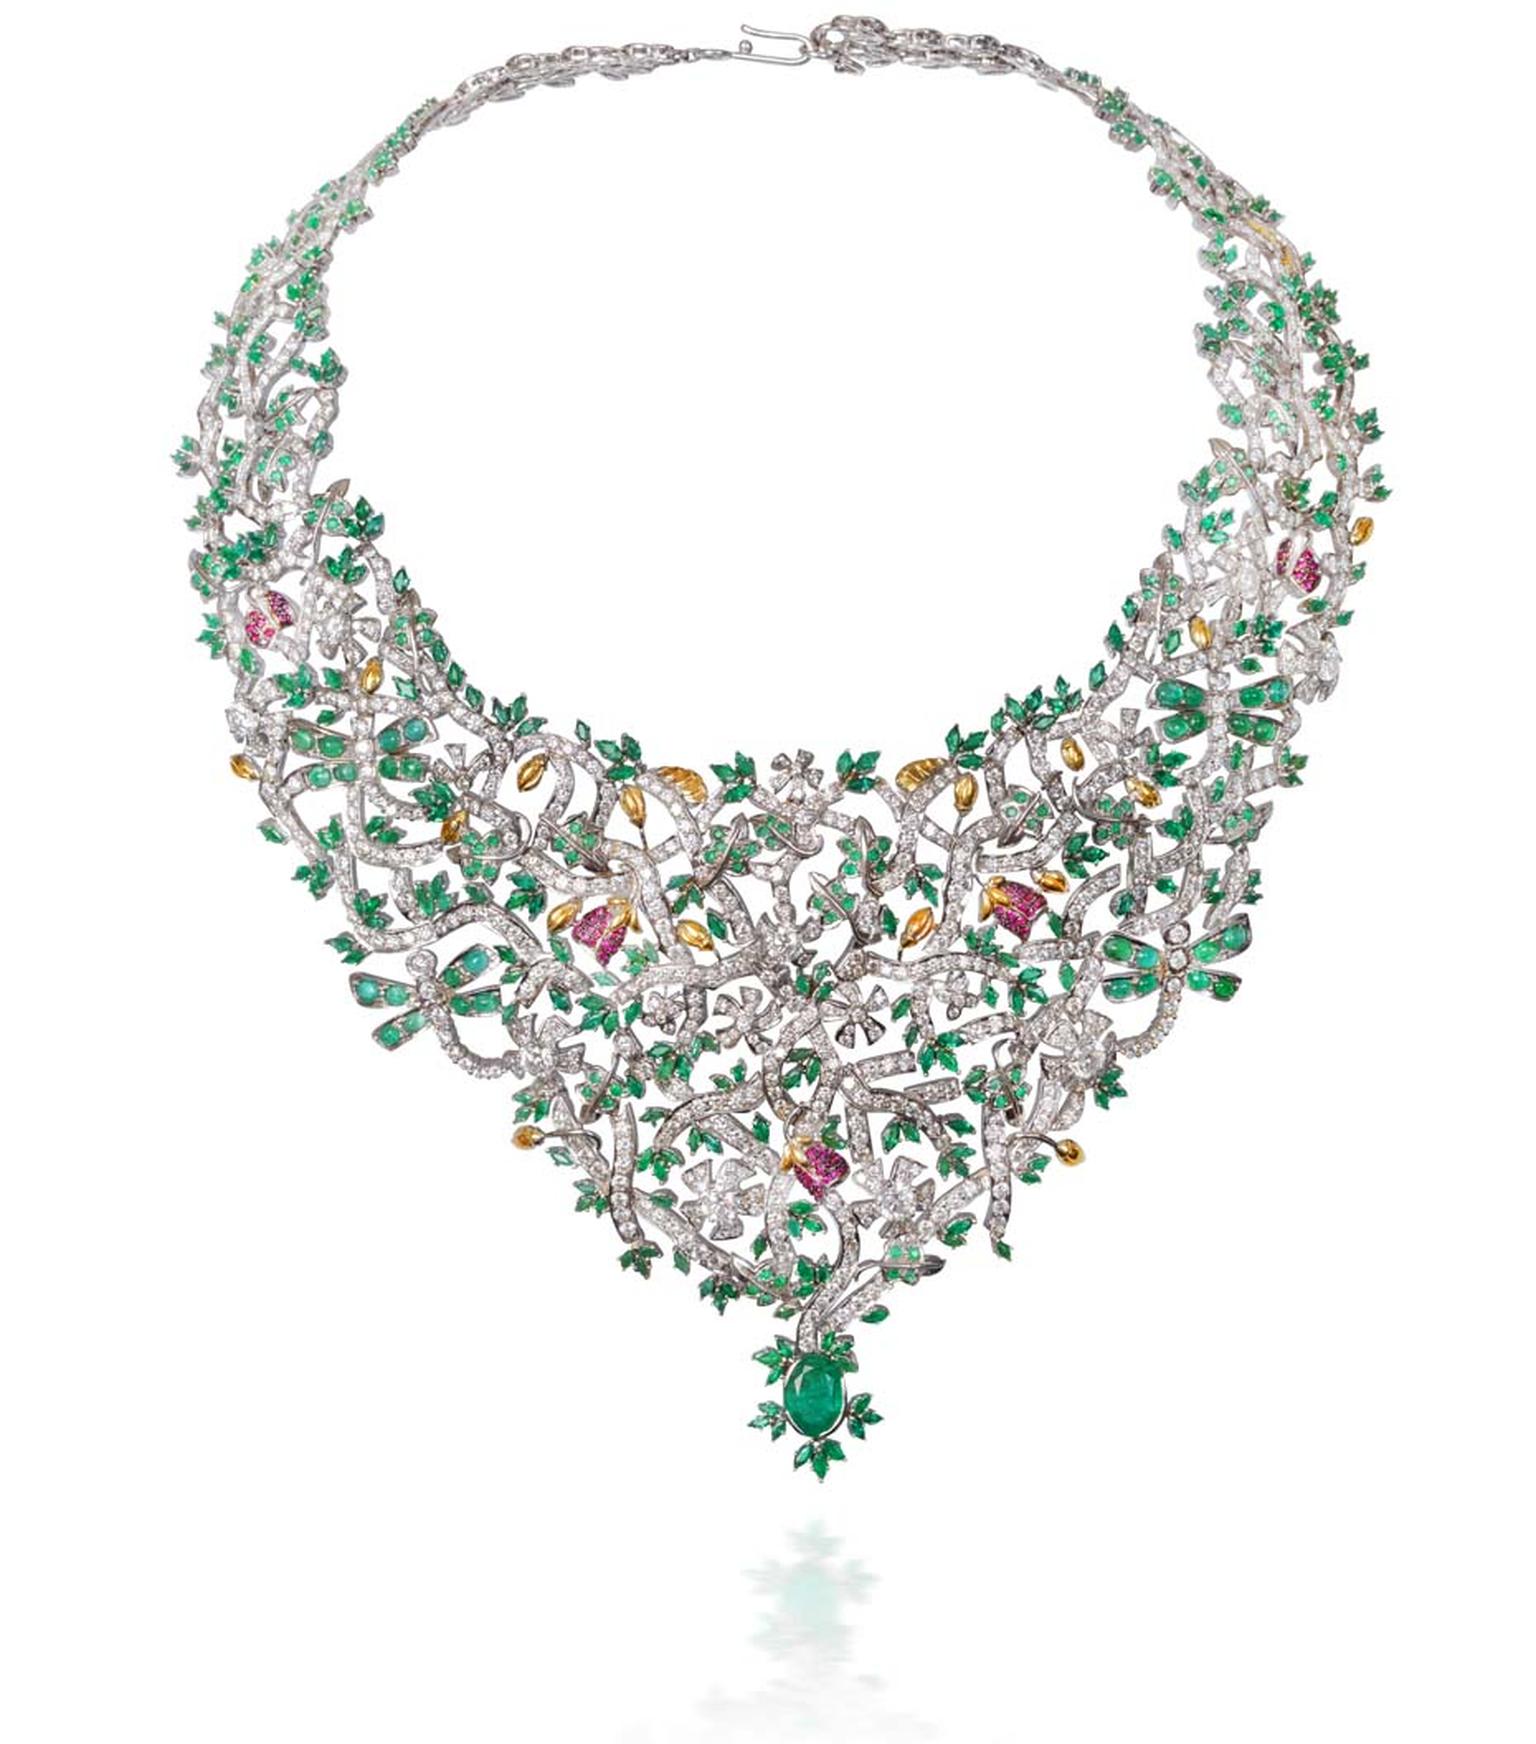 Lot 1, a necklace by Abaran Jewellers crafted with diamonds, Gemfields emeralds and rubies and set in white gold (estimate: INR 3,900,000 - 4,700,000; $65,000 - 79,000)